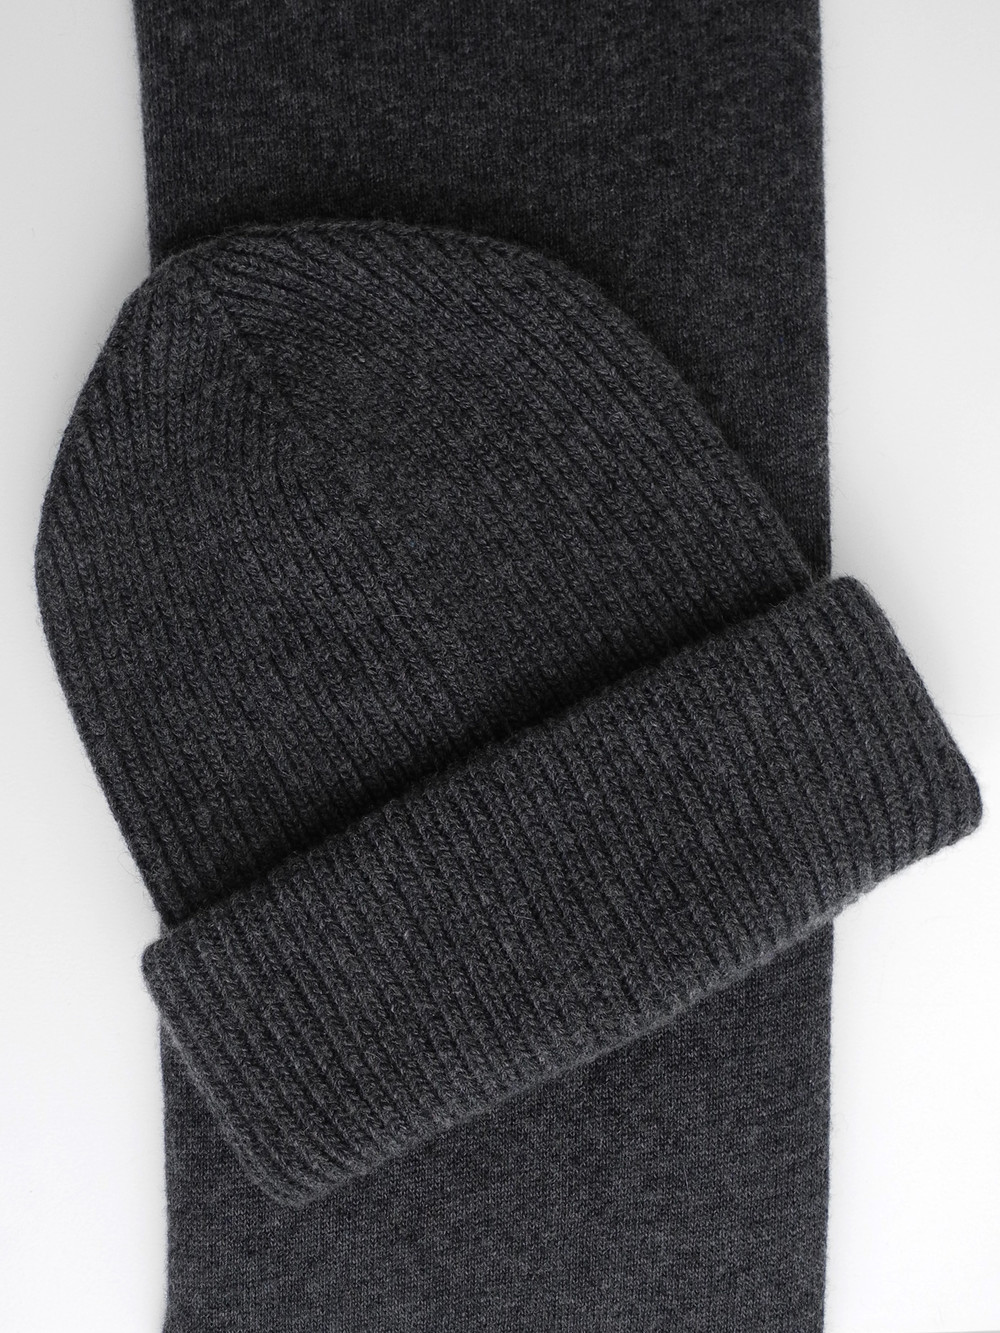 C.O.S.Y by SjaalMania Cosy Beanie Antracite